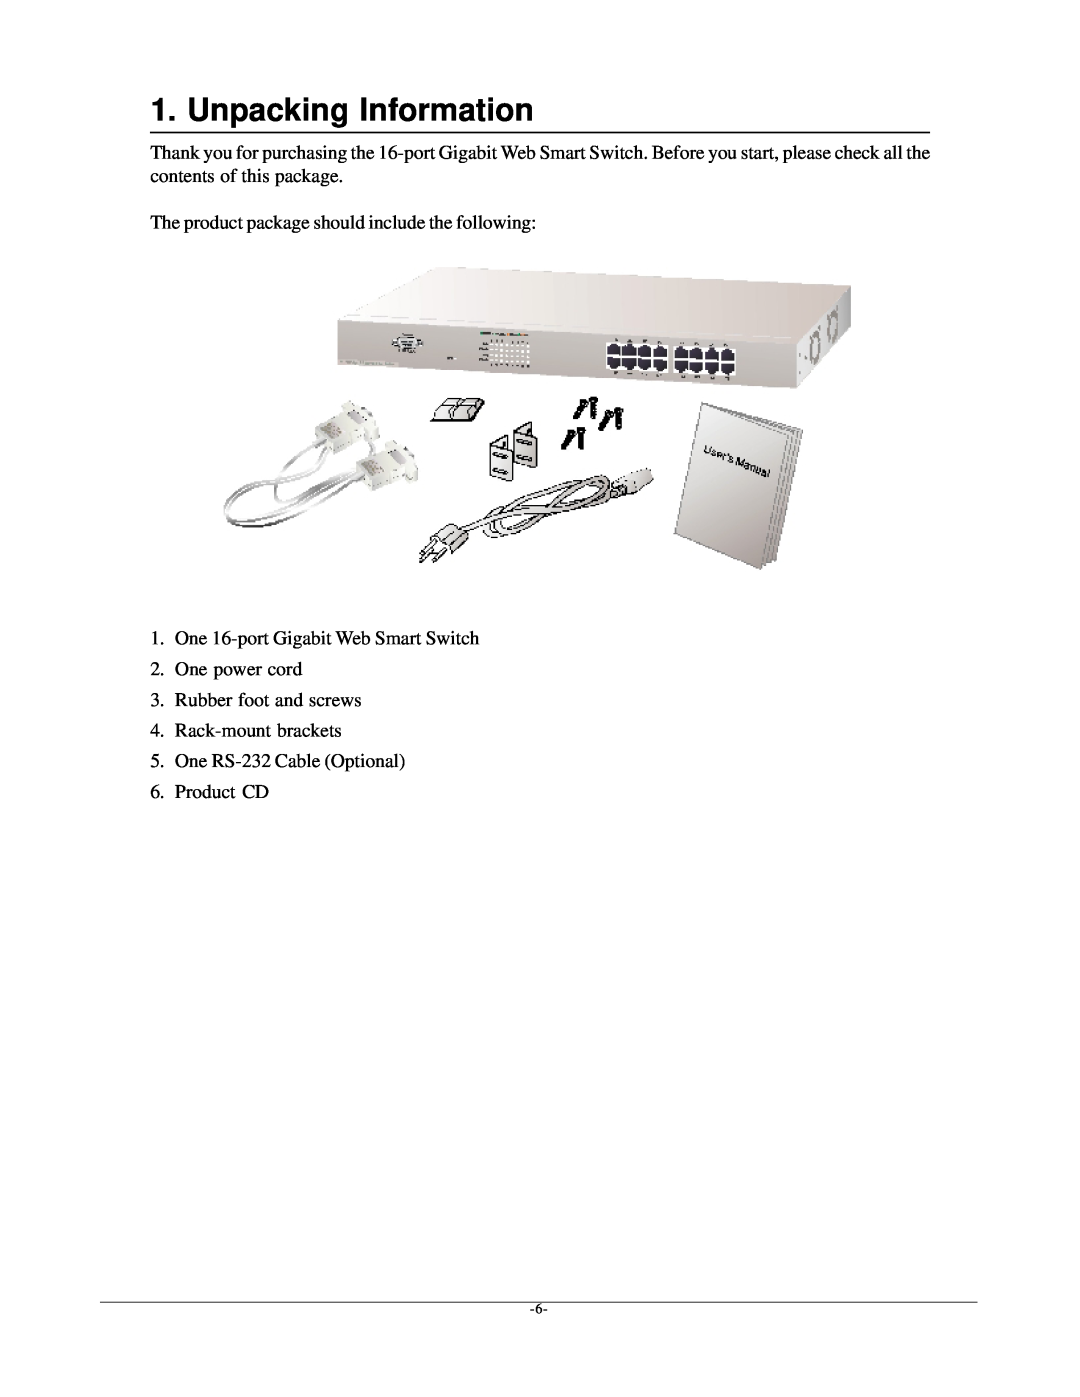 KTI Networks kgs-1601 manual Unpacking Information, The product package should include the following 